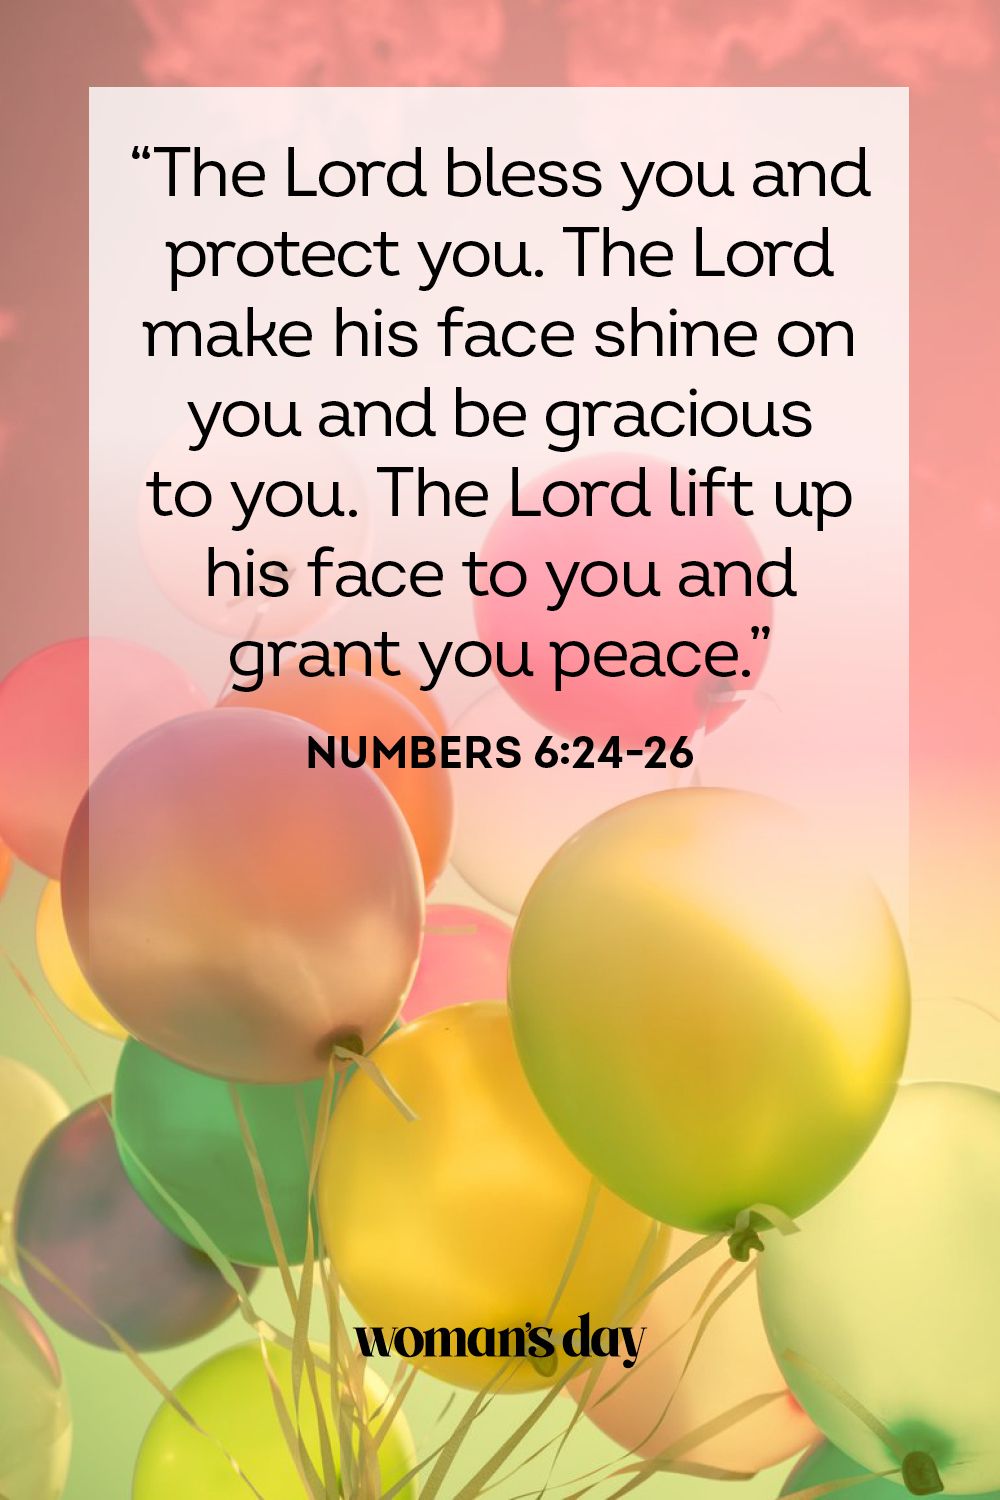 Inspirational Bible verses for birthday messages